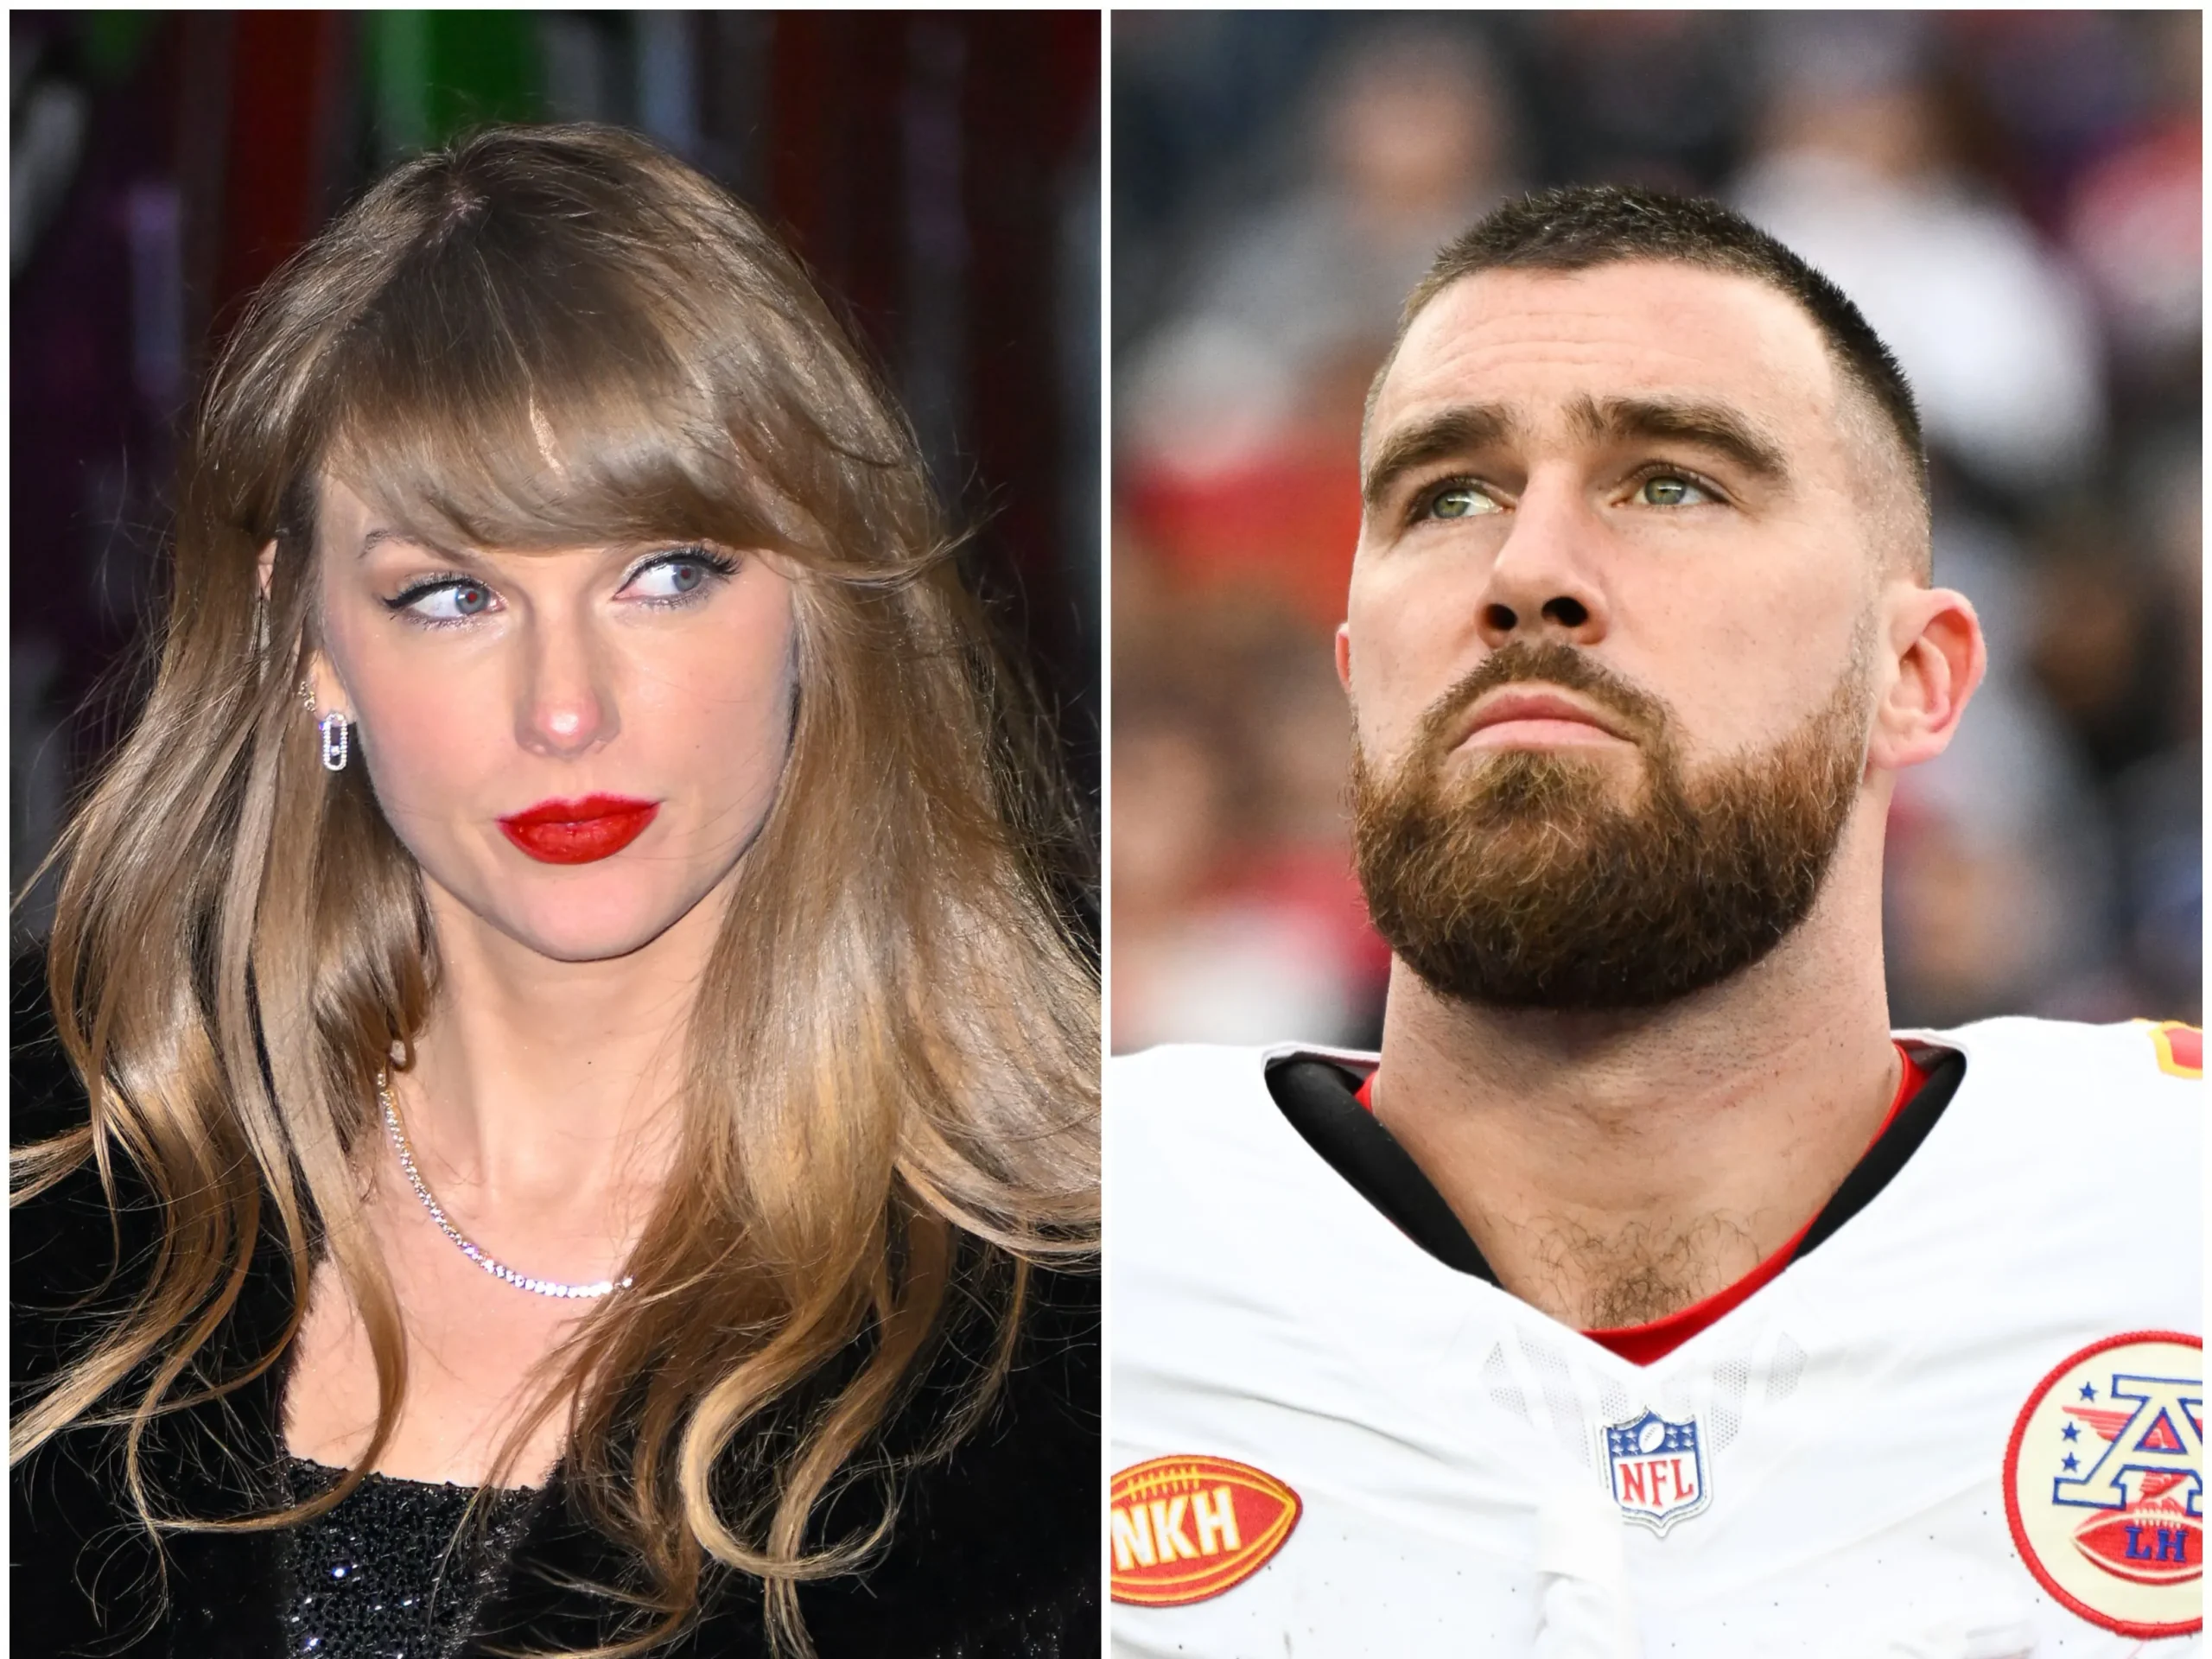 As rumors swirl about the seriousness of Taylor Swift's romance with Kansas City Chiefs' Travis Kelce, the NFL star adds a playful twist by hinting at potential baby names : Taylor's reaction go fans thinking otherwise  